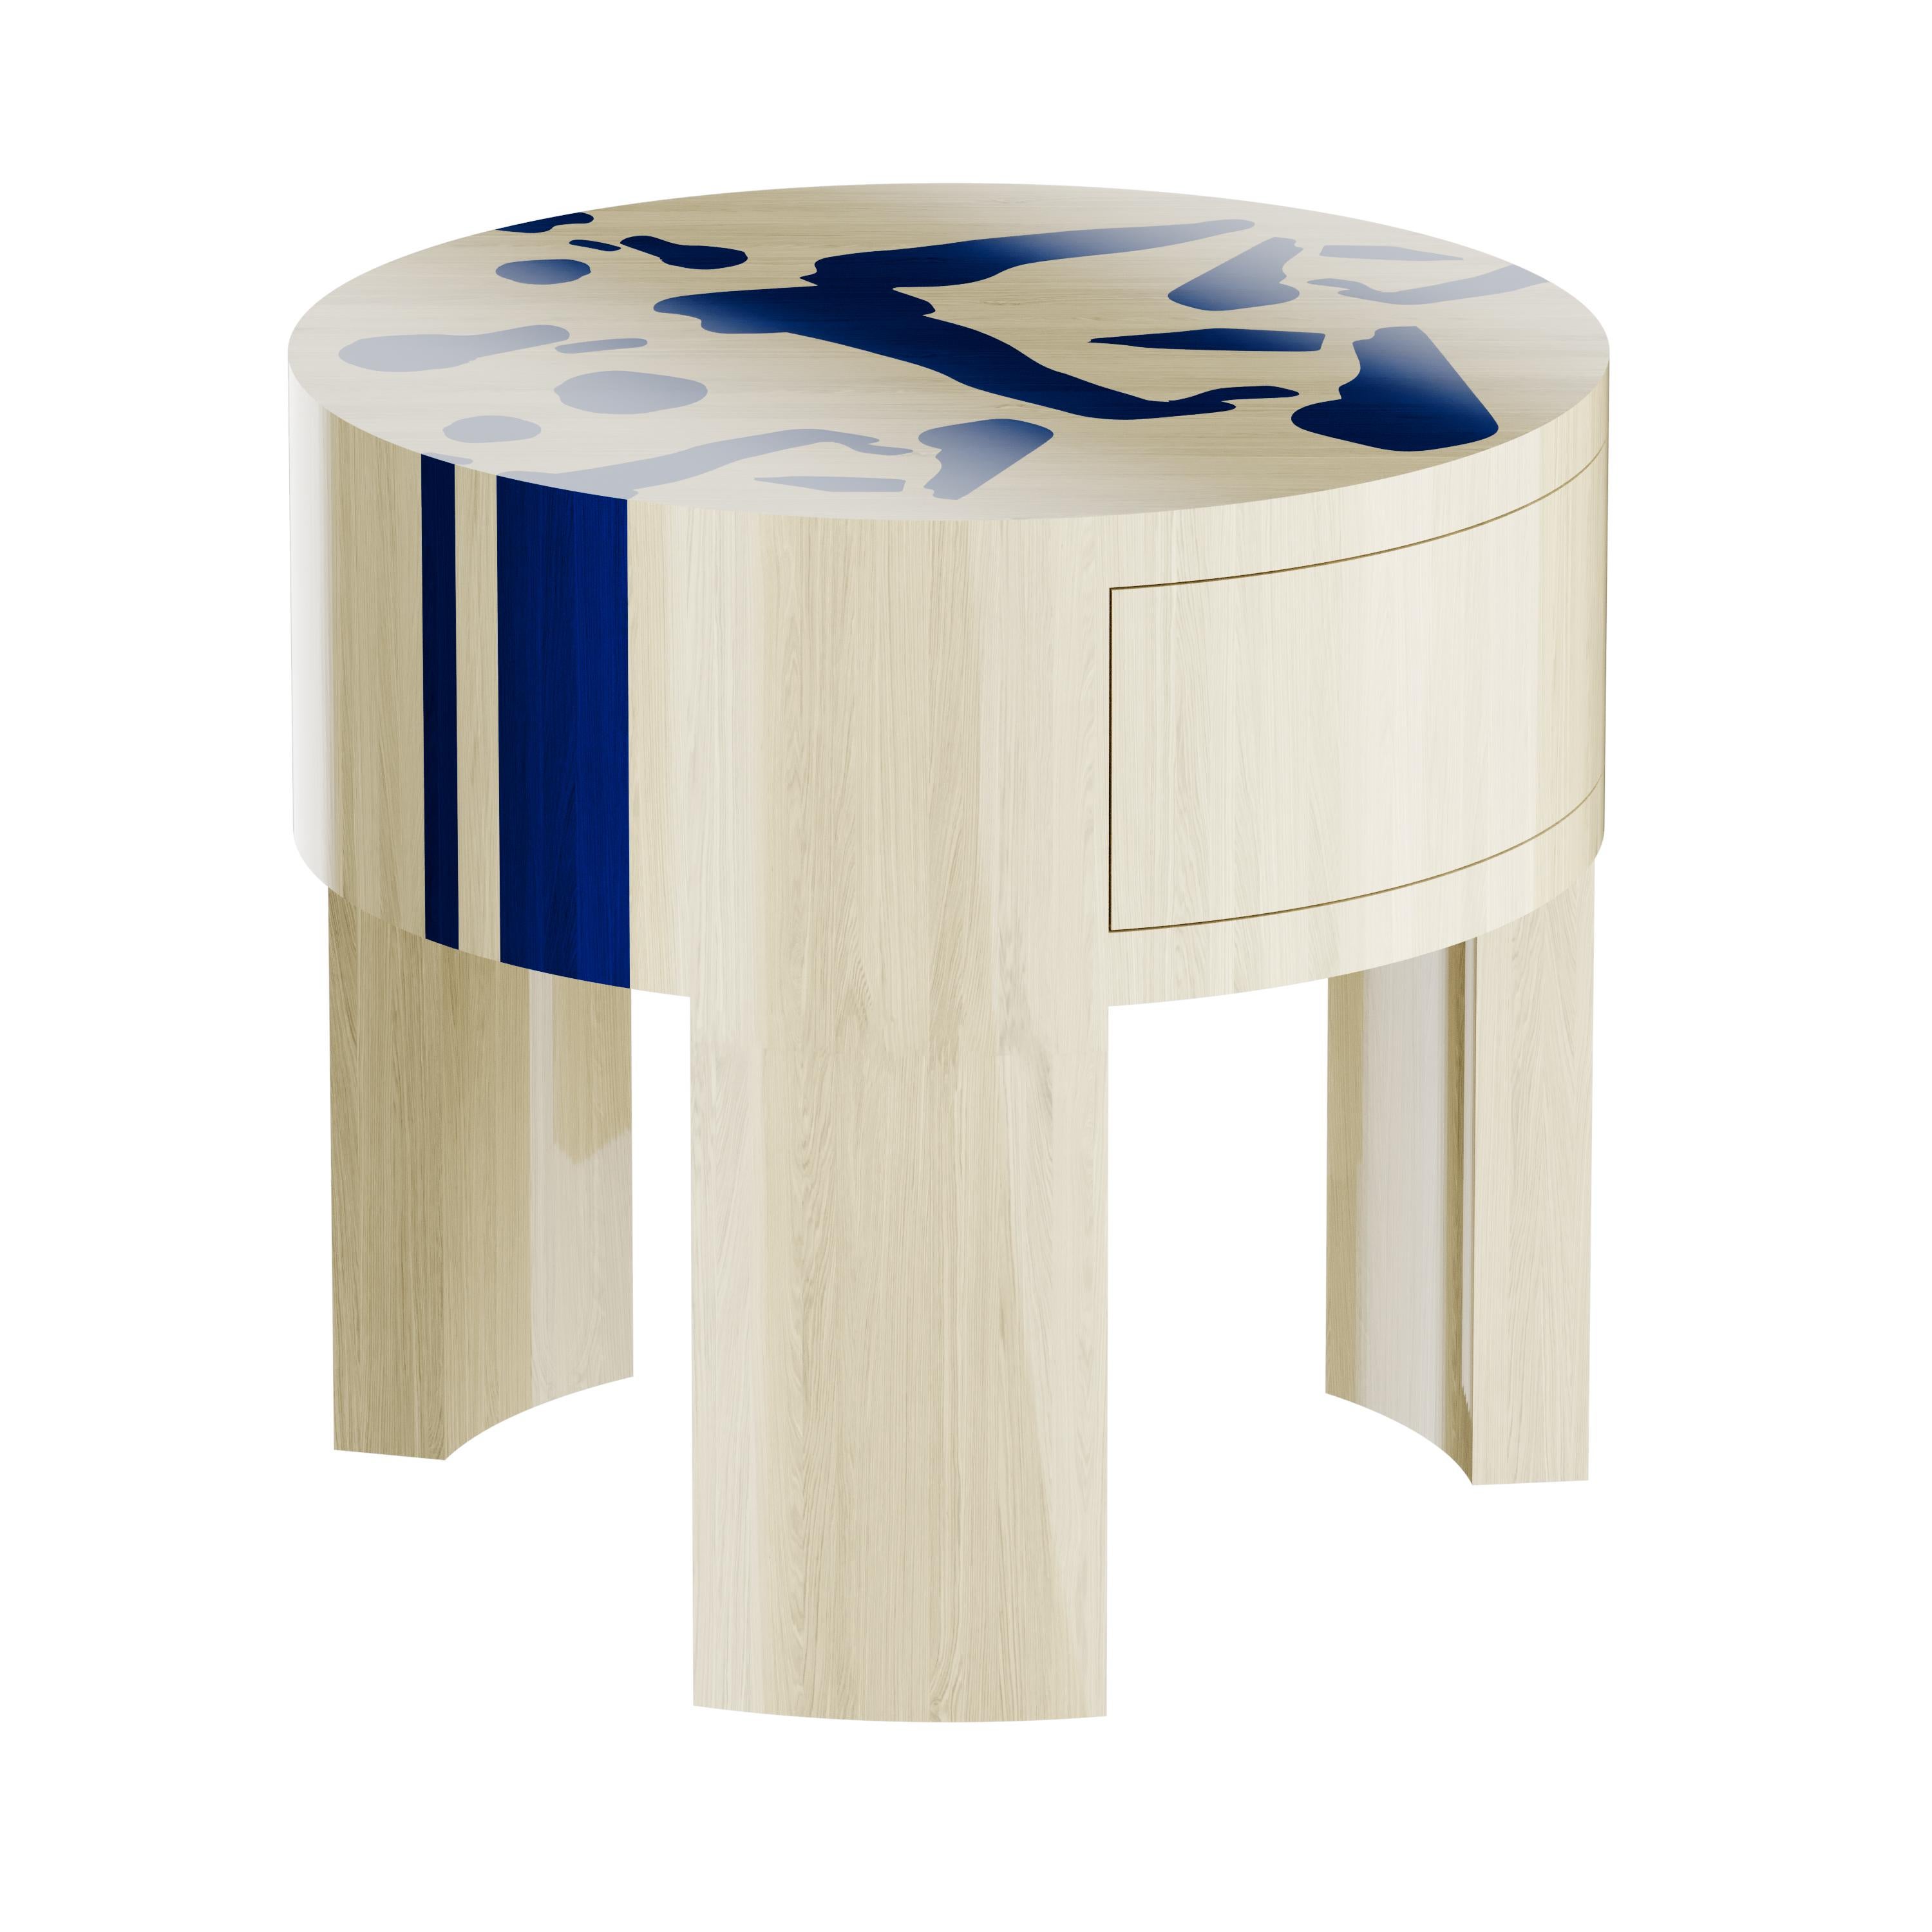 Portuguese Minimal Modern Round Nightstand Bedside Table Wood One Drawer For Sale